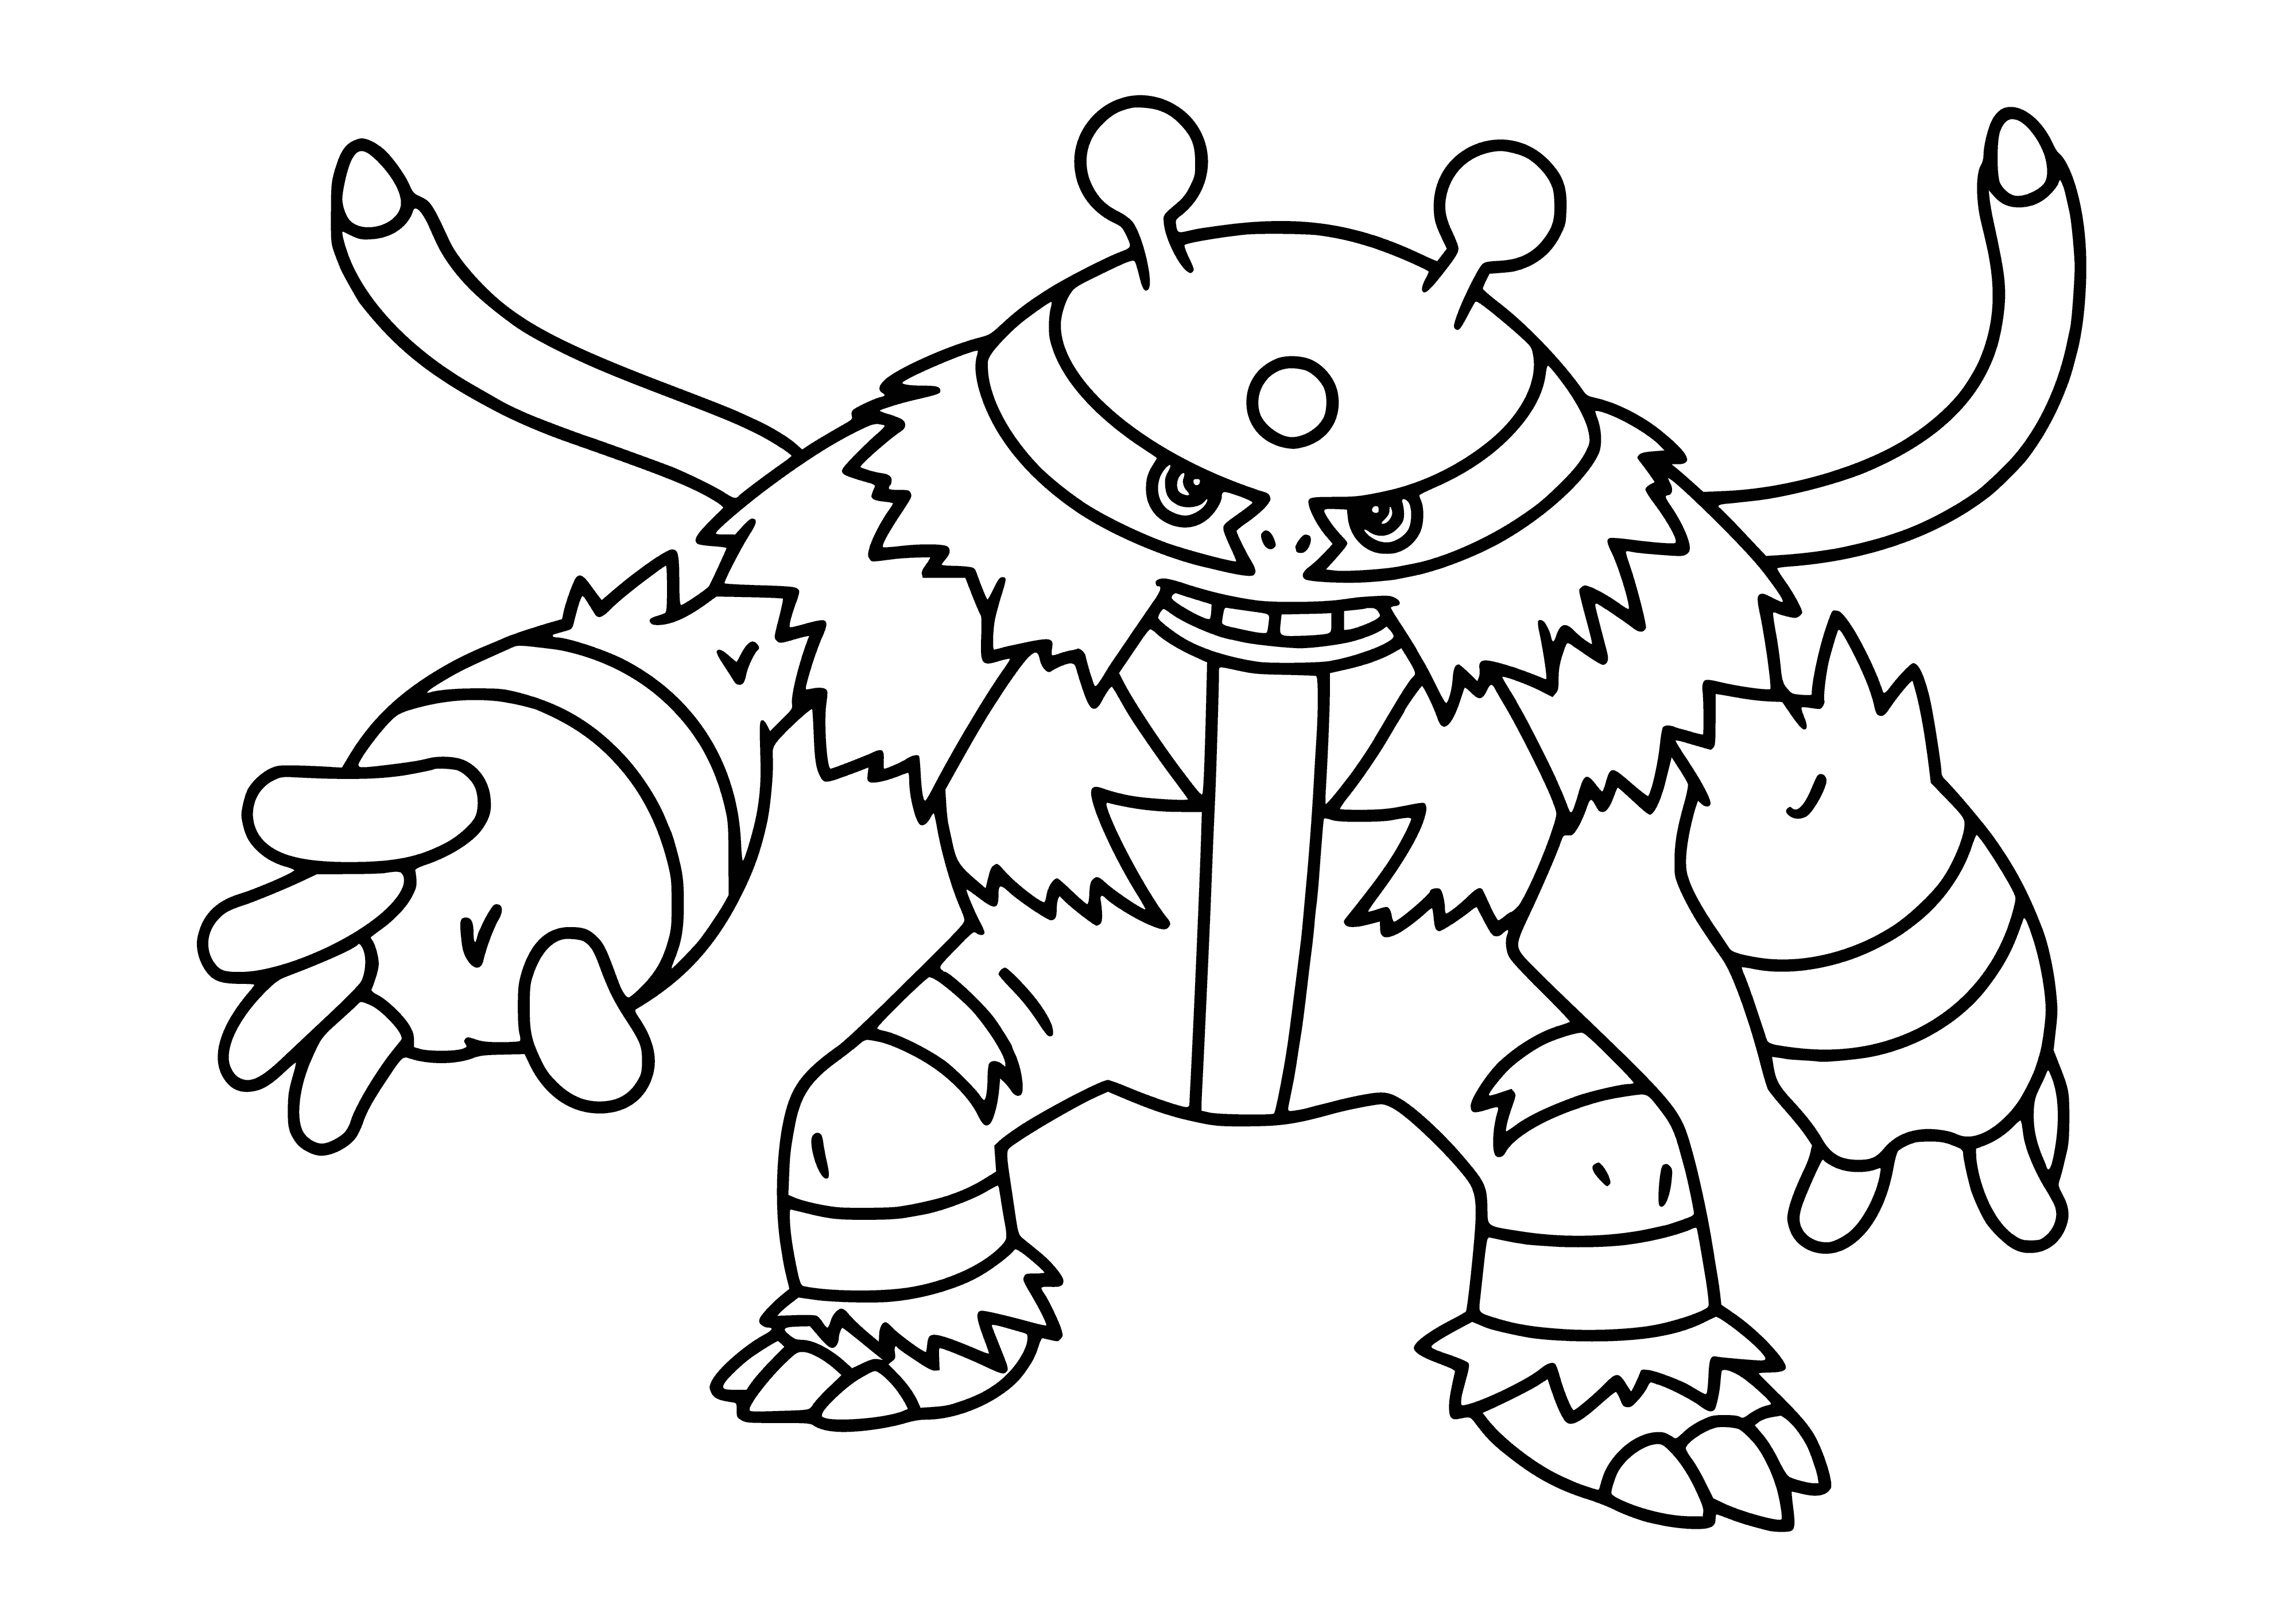 coloring page: Orange & yellow Pokémon with muscular arms & legs, 3 claws on hands, yellow eyes with black pupils, & long tail.